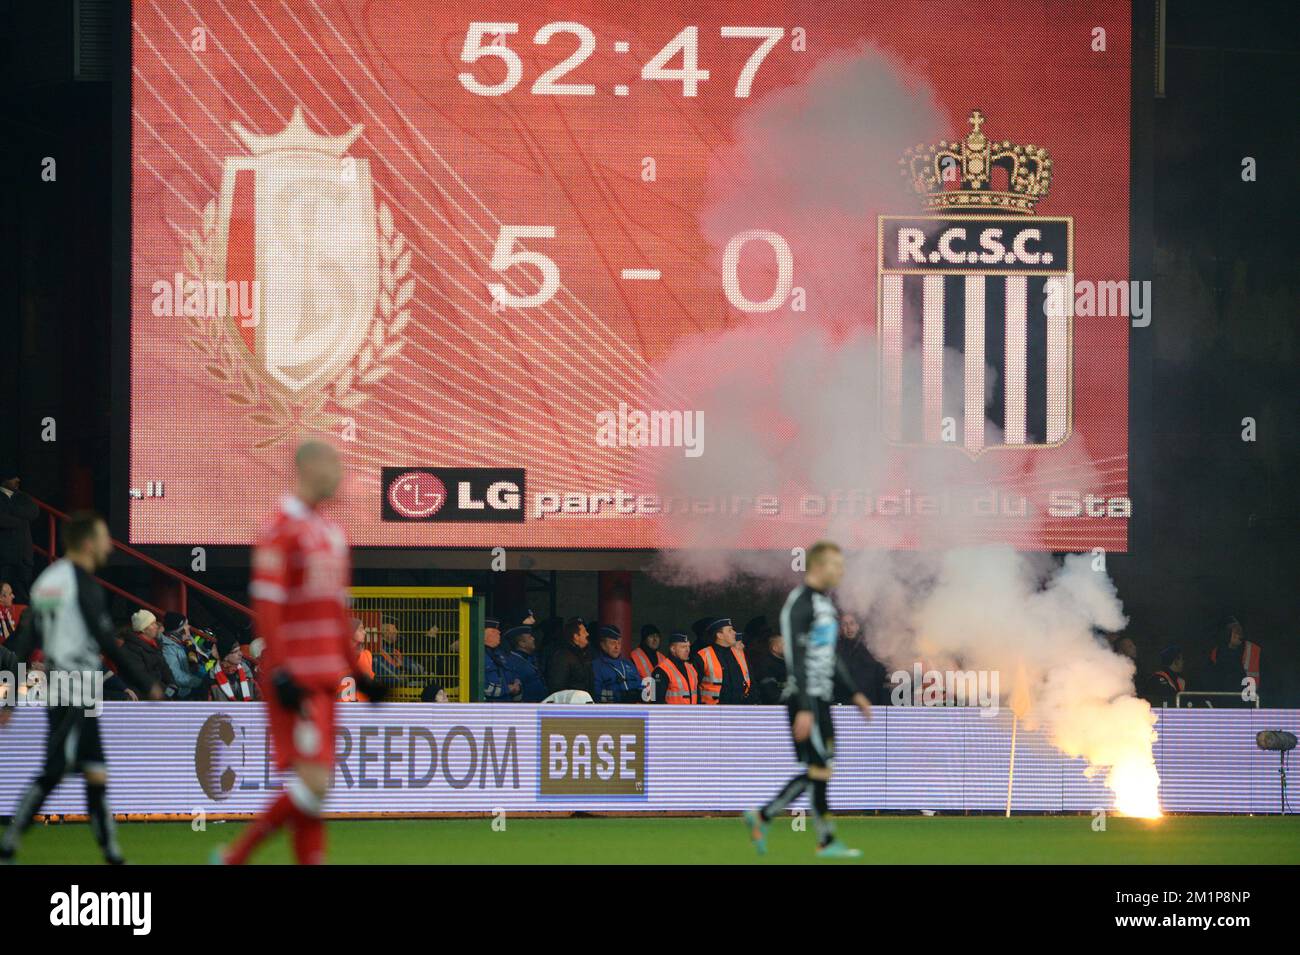 20121207 - LIEGE, BELGIUM: Illustration picture shows the scoreboard during the Jupiler Pro League match between Standard and Charleroi, in Liege, Friday 07 December 2012, on day 19 of the Belgian soccer championship. BELGA PHOTO YORICK JANSENS Stock Photo